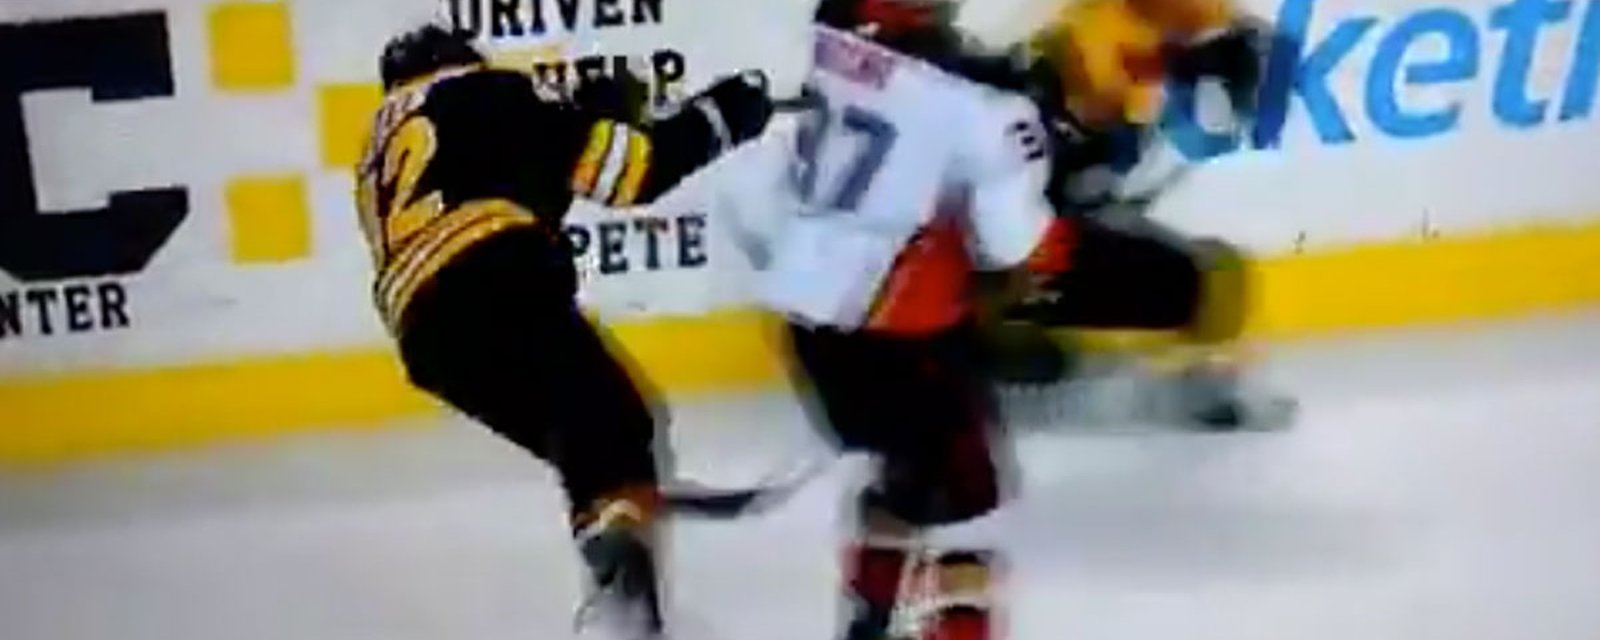 Breaking: Ducks' Ritchie gets away with dirty cheap hit on Backes! 